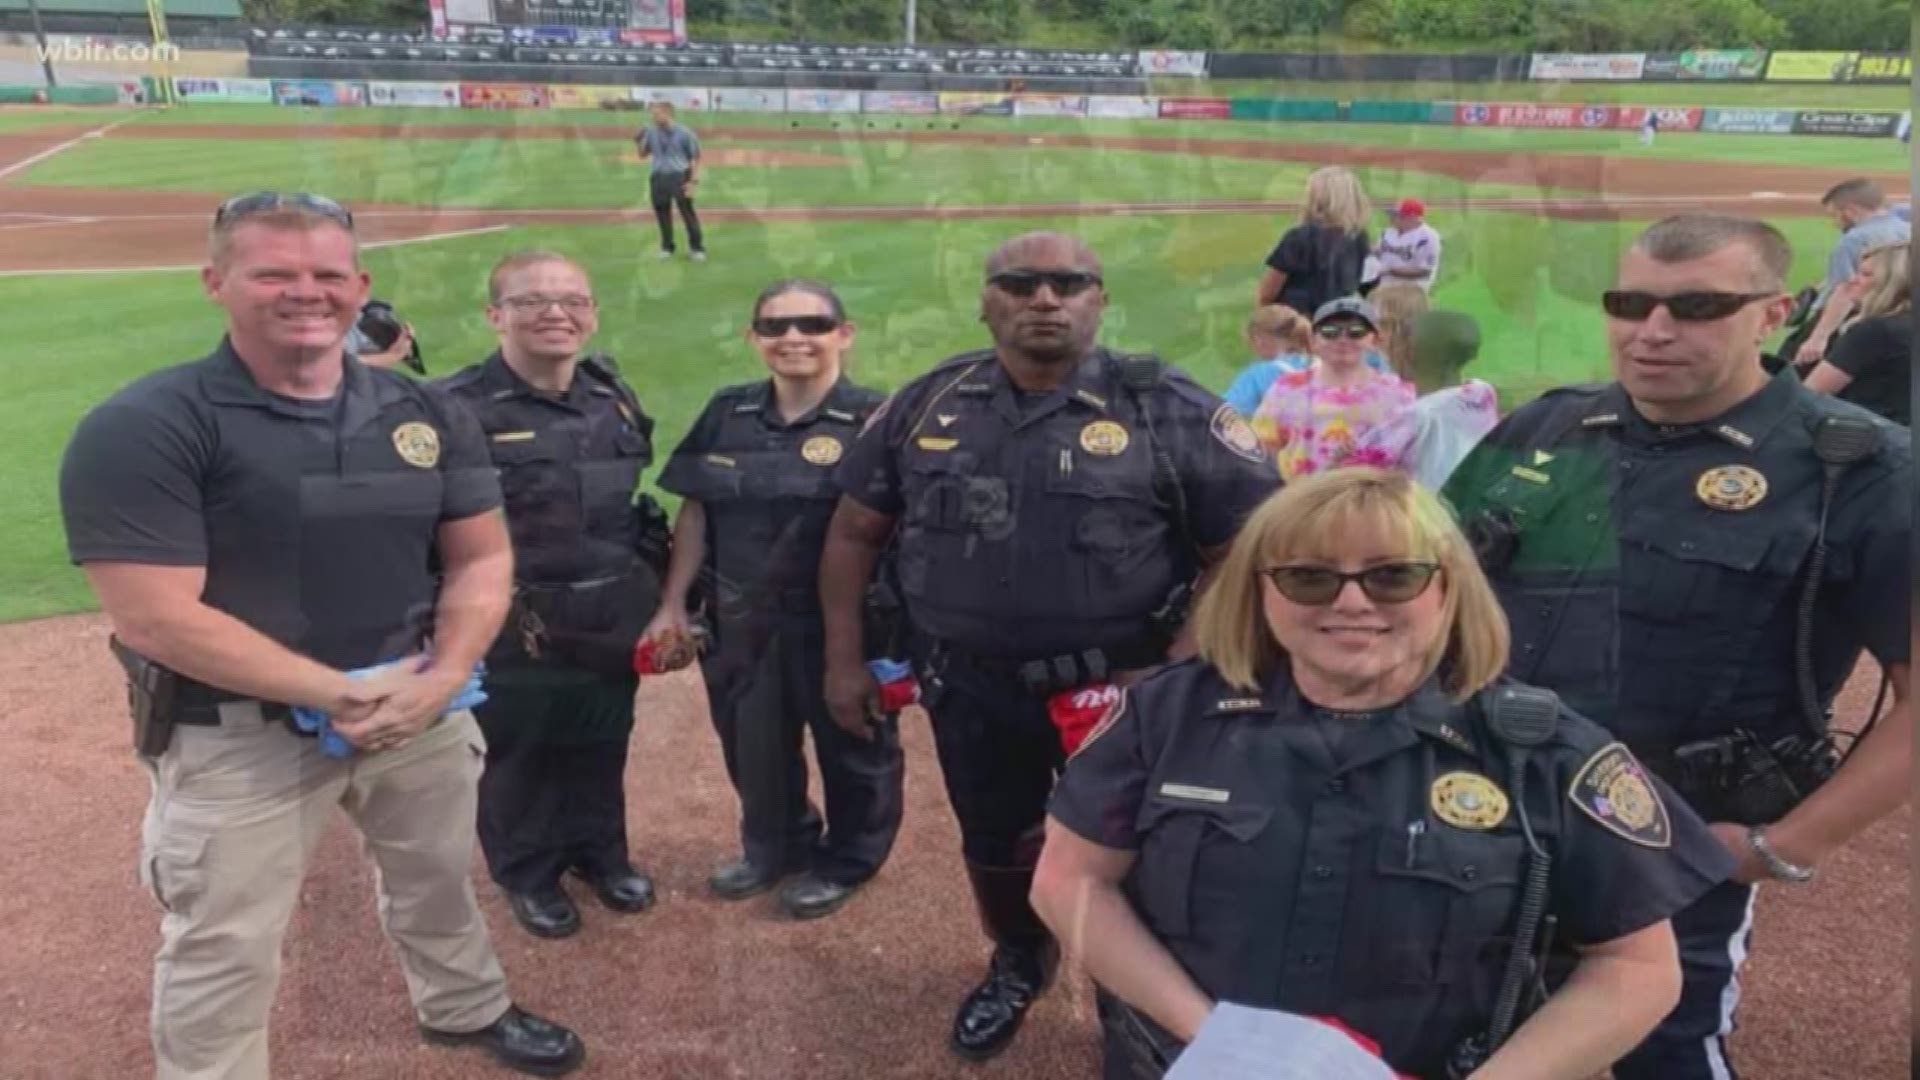 The Knox County Sheriff's Office made the announcement earlier today at safety day at Smokies Stadium in Sevierville.
D.A.R.E. stands for Drug Abuse Resistance Education program.